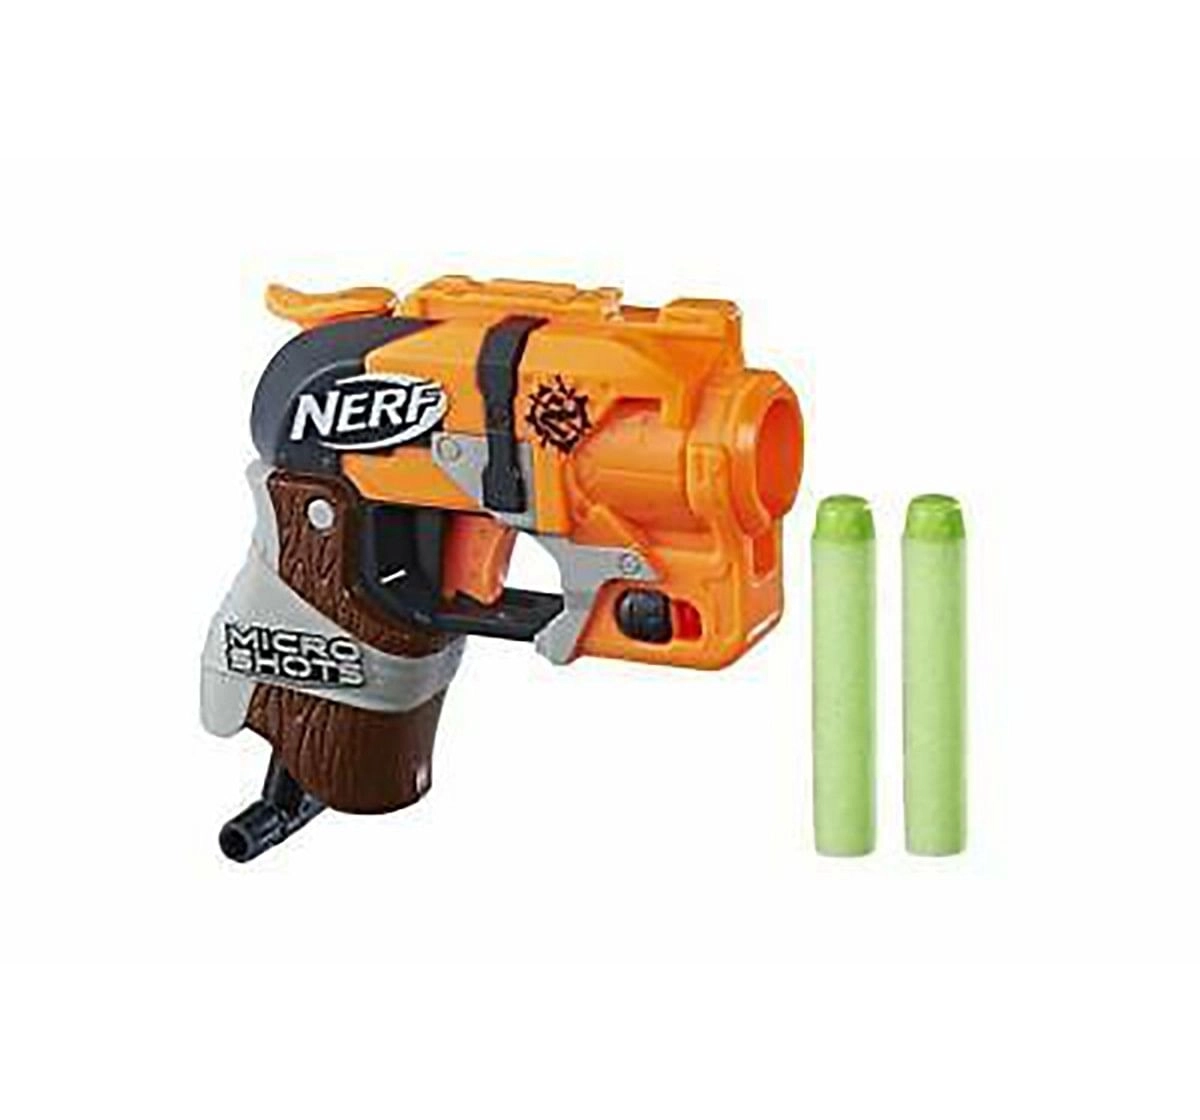 Nerf Microshots Blaster and Combats Assorted Blasters for Kids age 8Y+ 